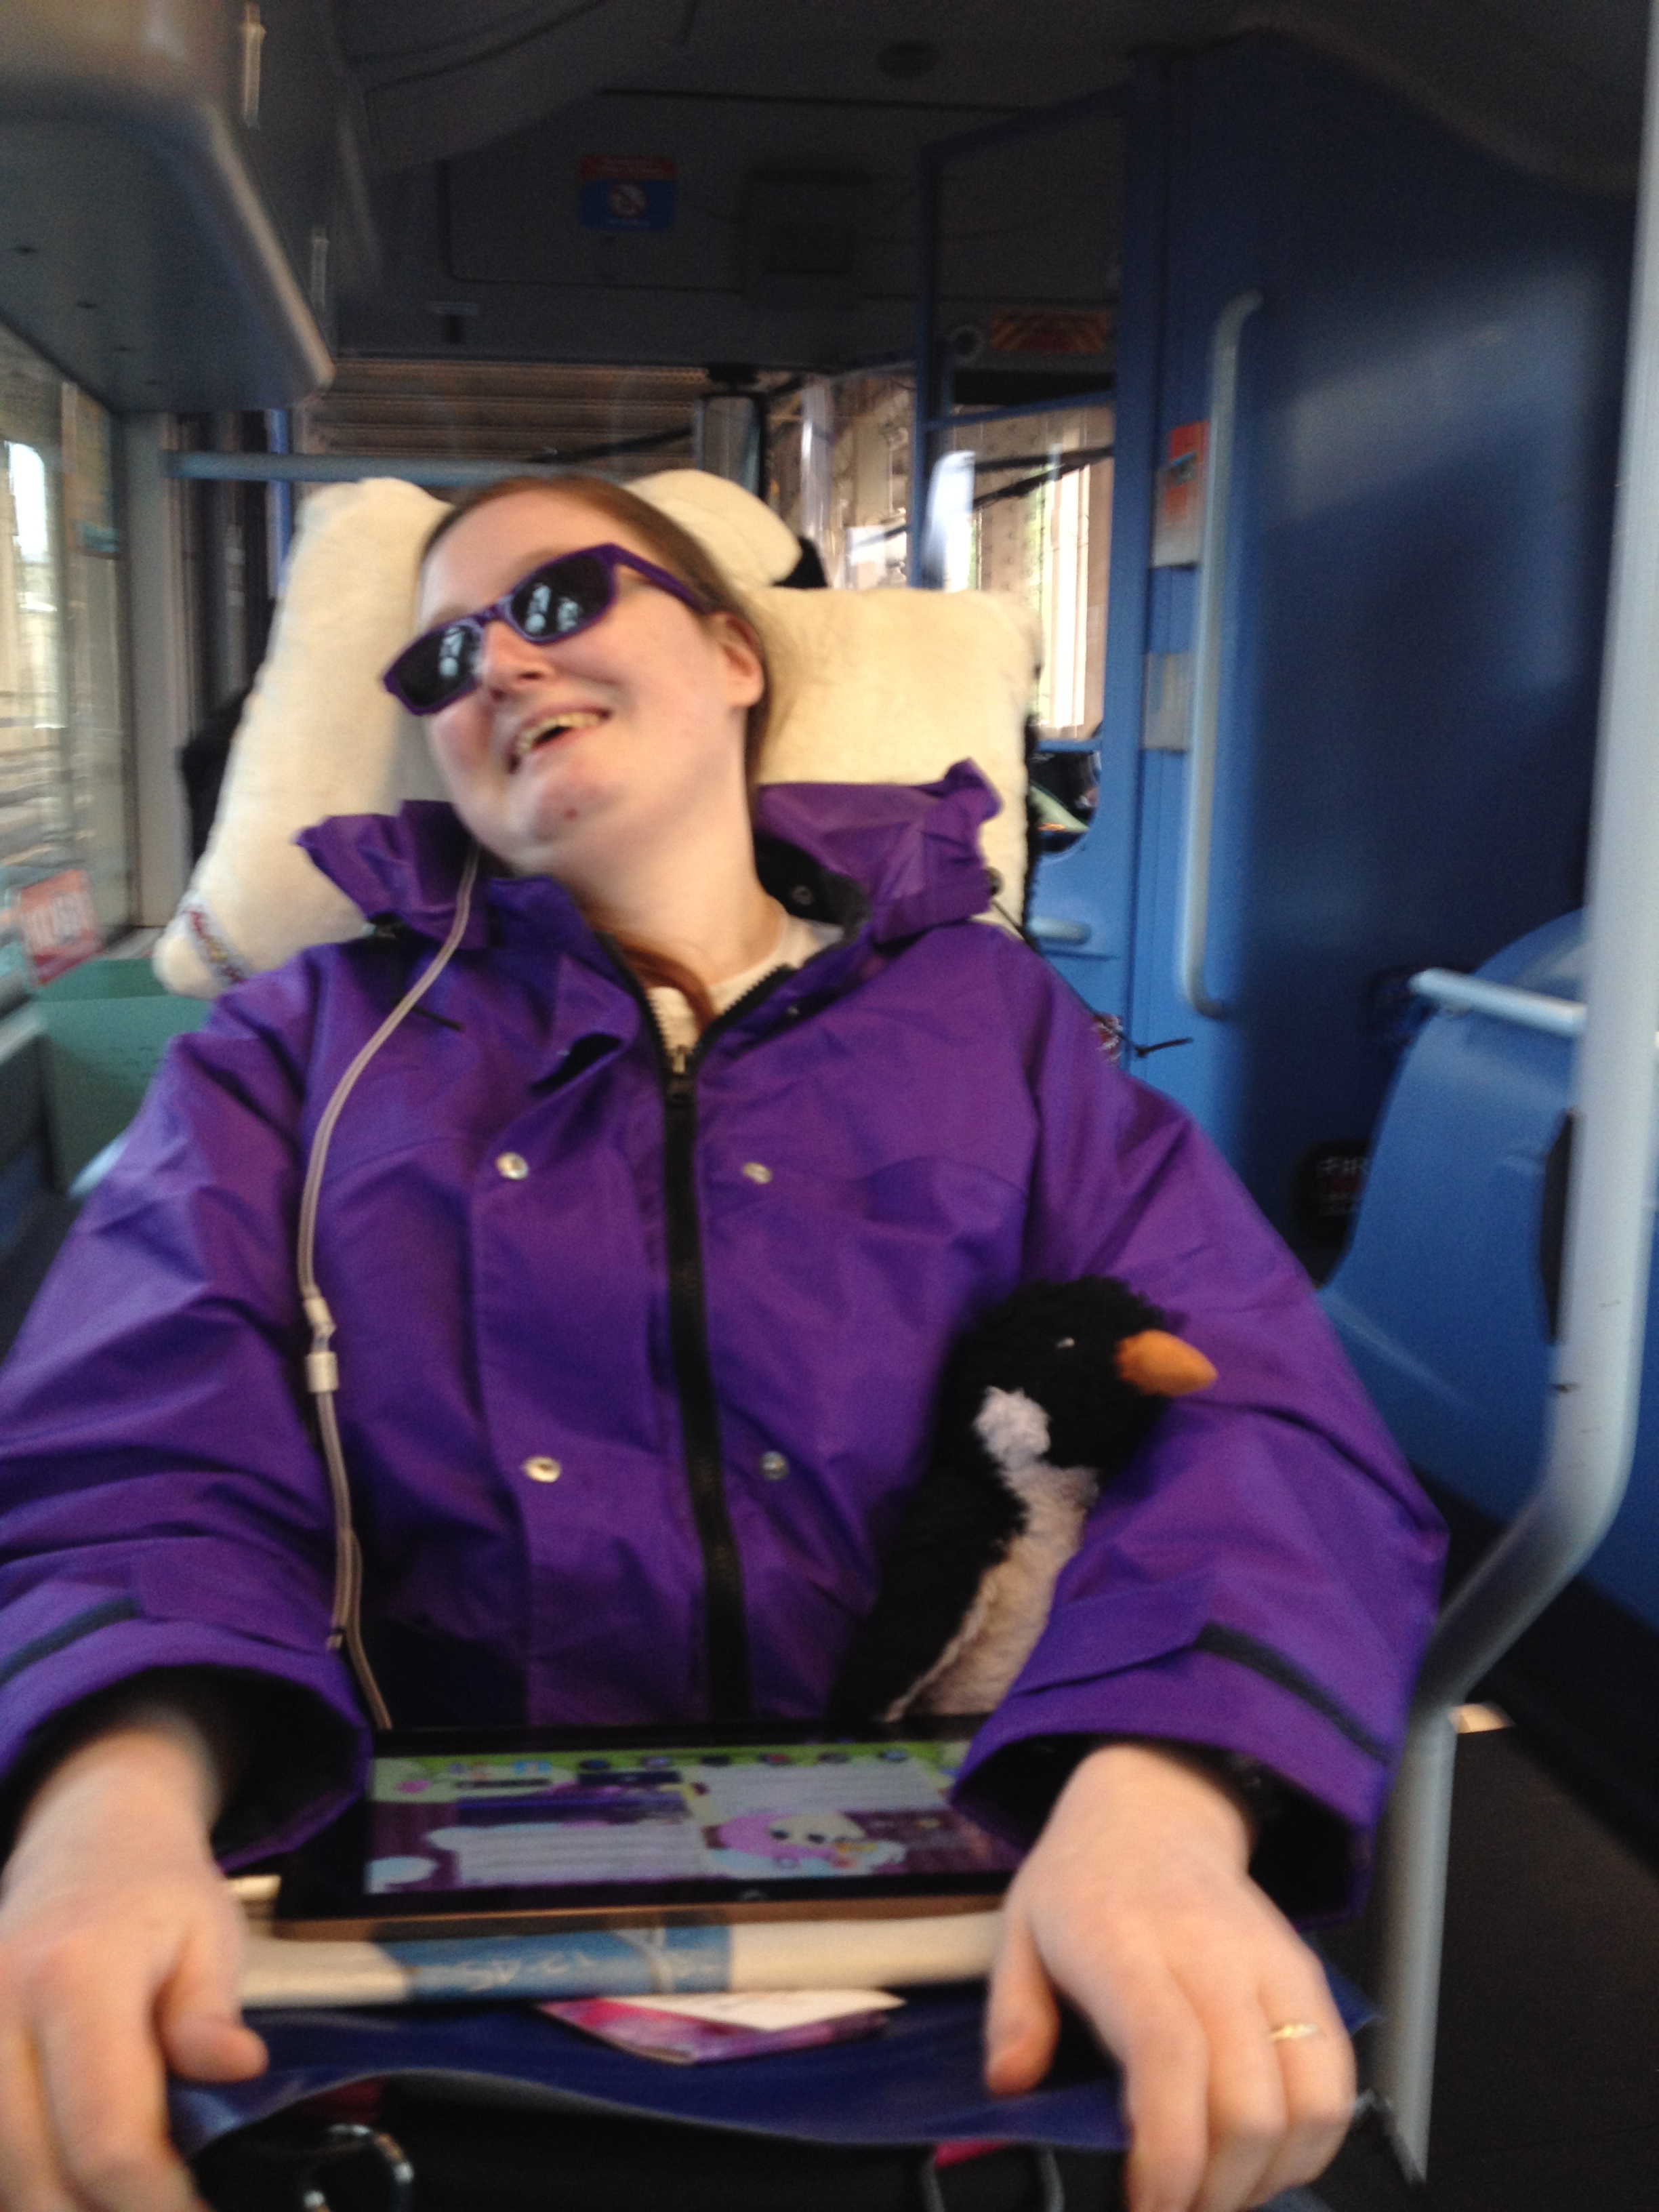 Danni in their new wheelchair on the bus